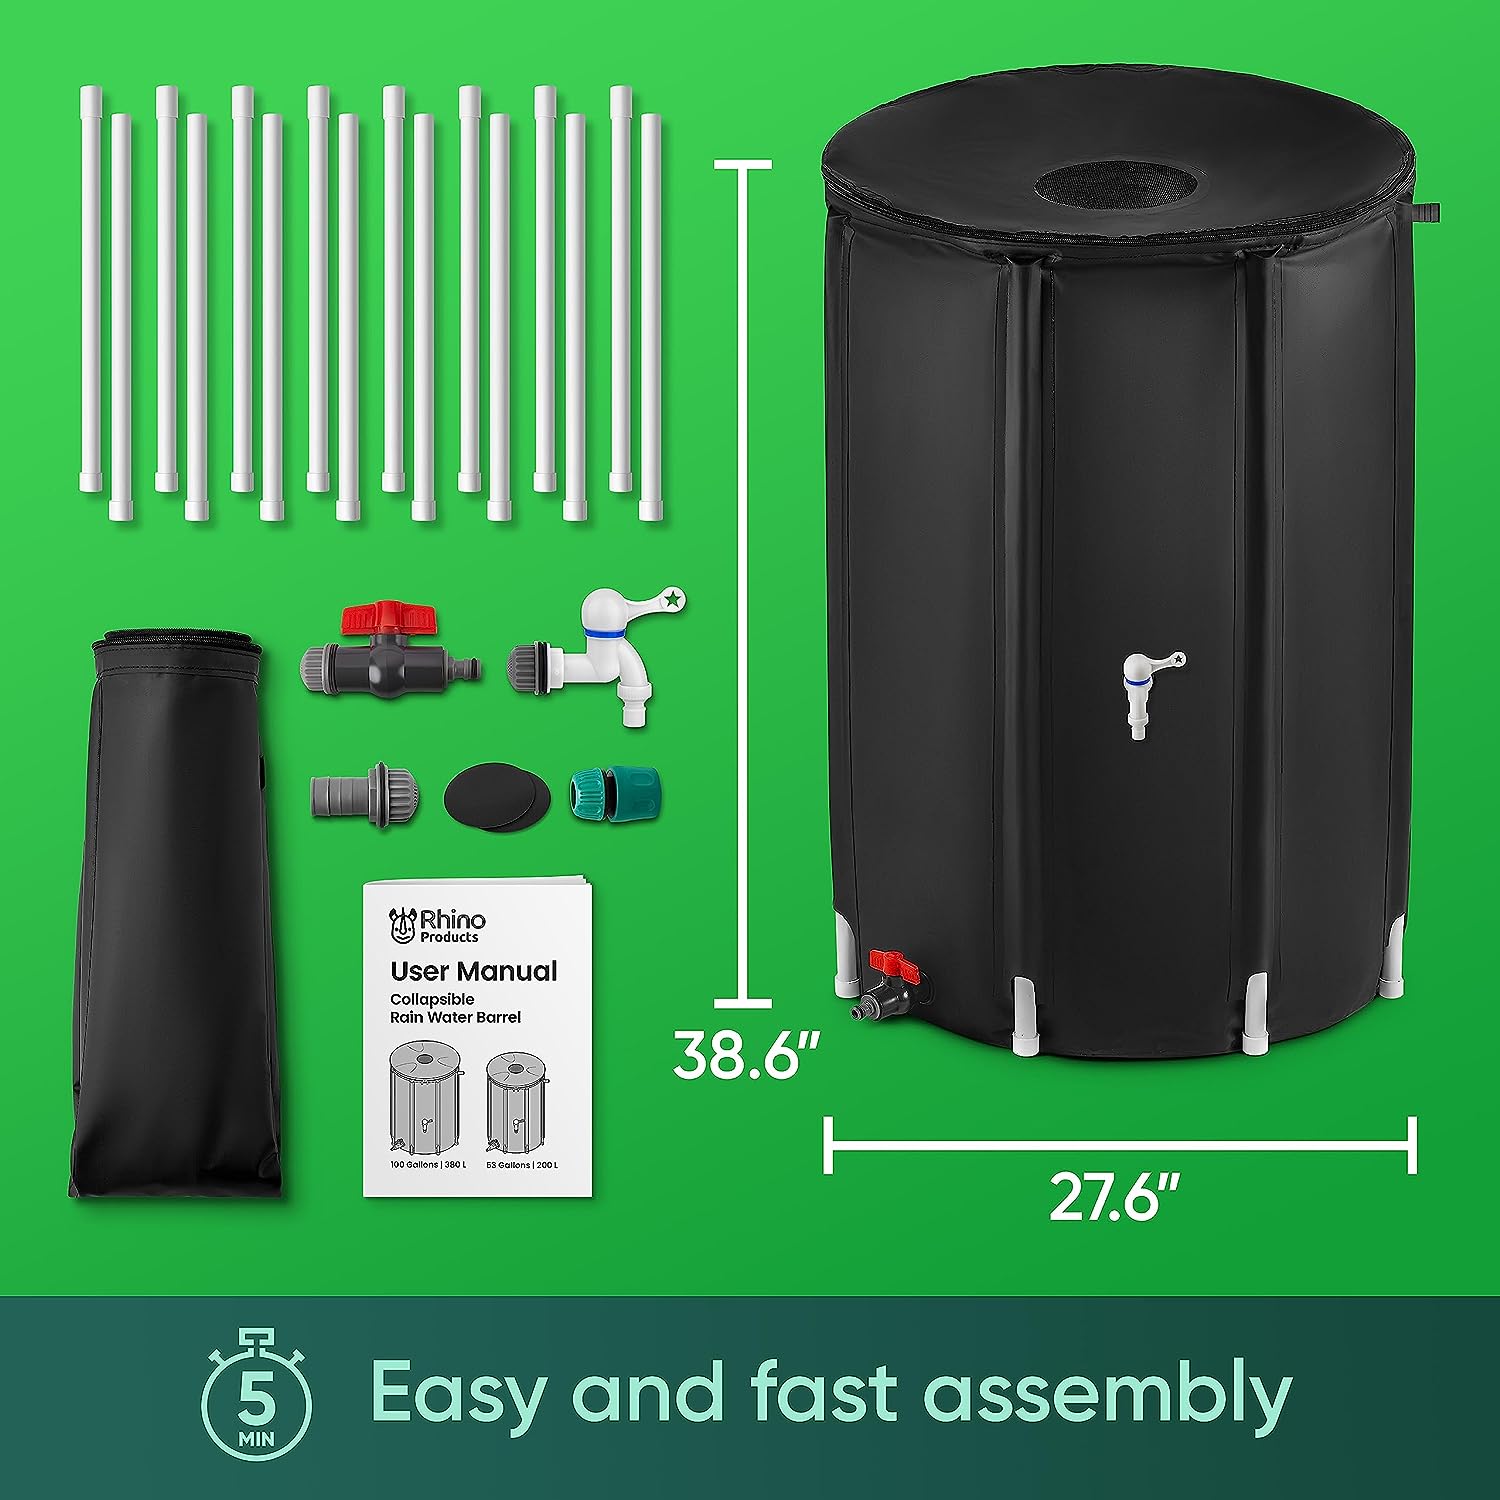 BaseMate Collapsible Rain Barrel | 380 Litre Extra-Stable Rainwater Collection System w/Mesh on Top, Drain Pipe, & Spigot | Rain Barrels to Collect Rainwater from Gutter | Heavy-Duty Rain Catcher